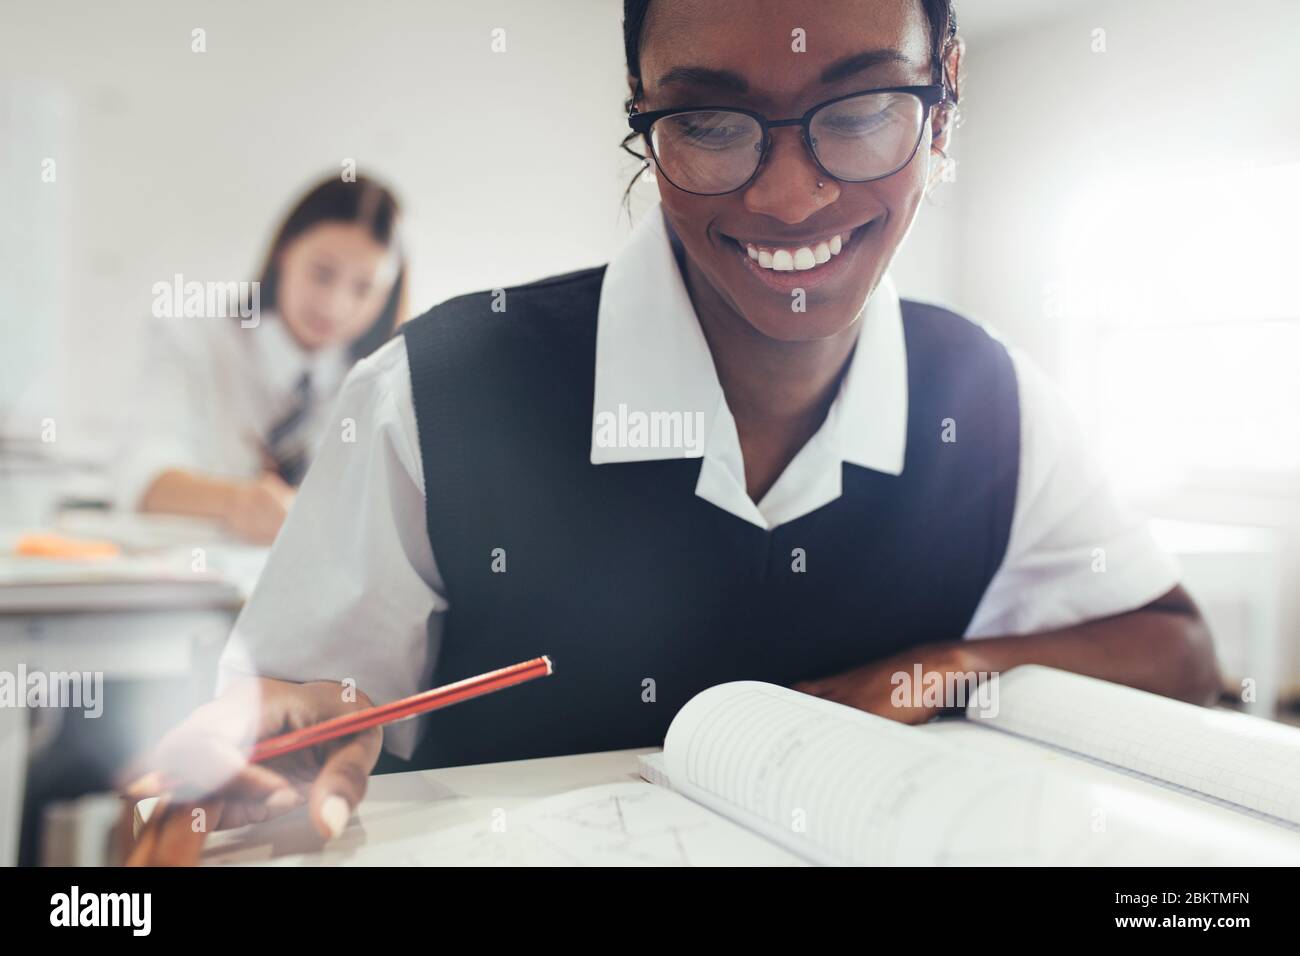 Teenage girl wearing eyeglasses sitting at desk in classroom in high school. Female student smiling while studying in classroom. Stock Photo